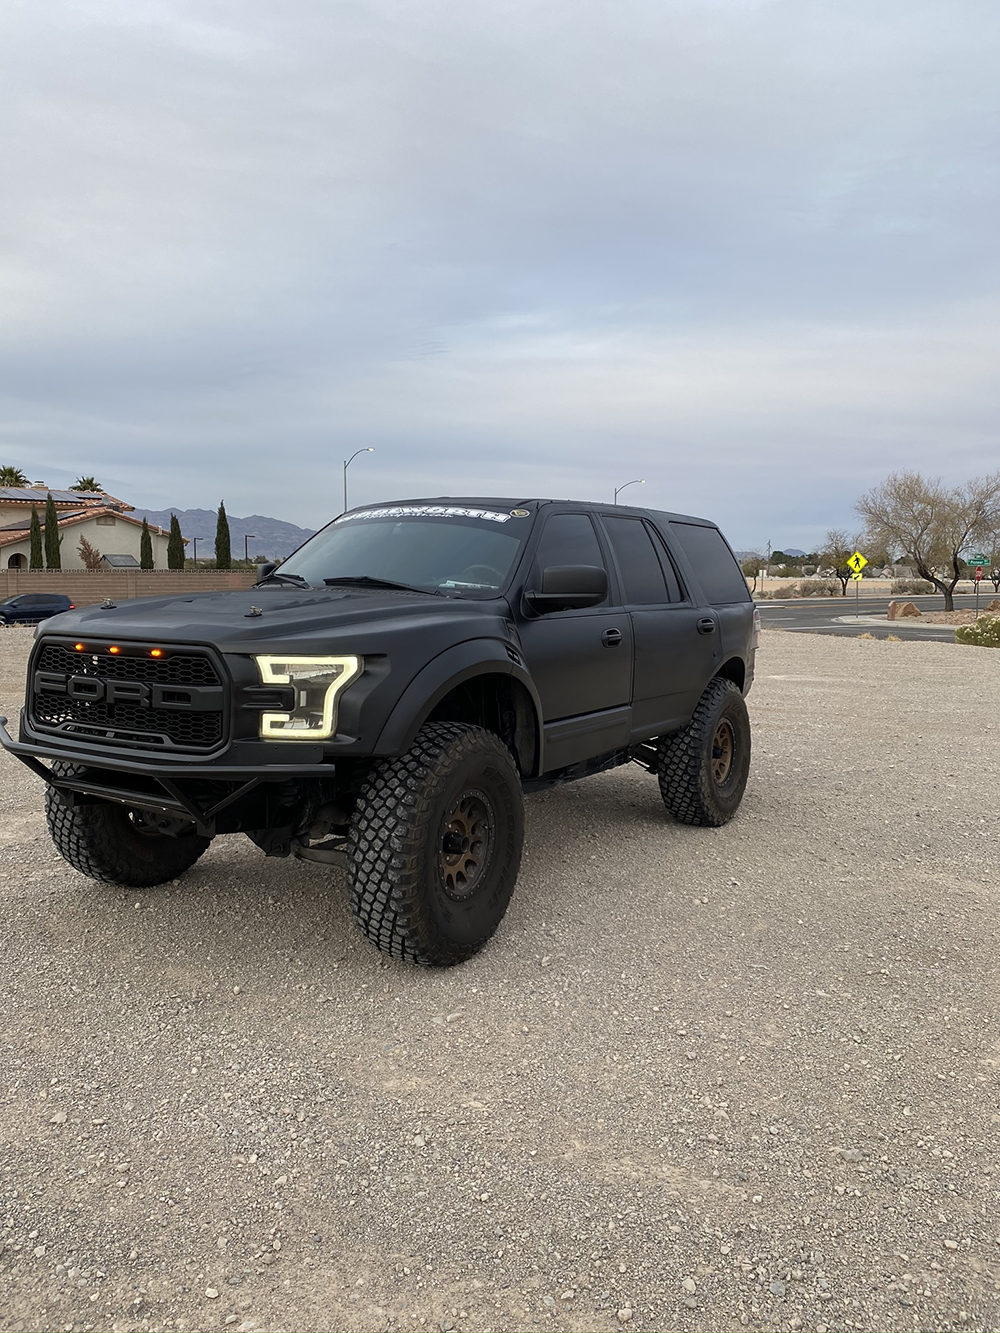 Badass Ford Raptor SUV - Ford Expedition on 40 inch tires